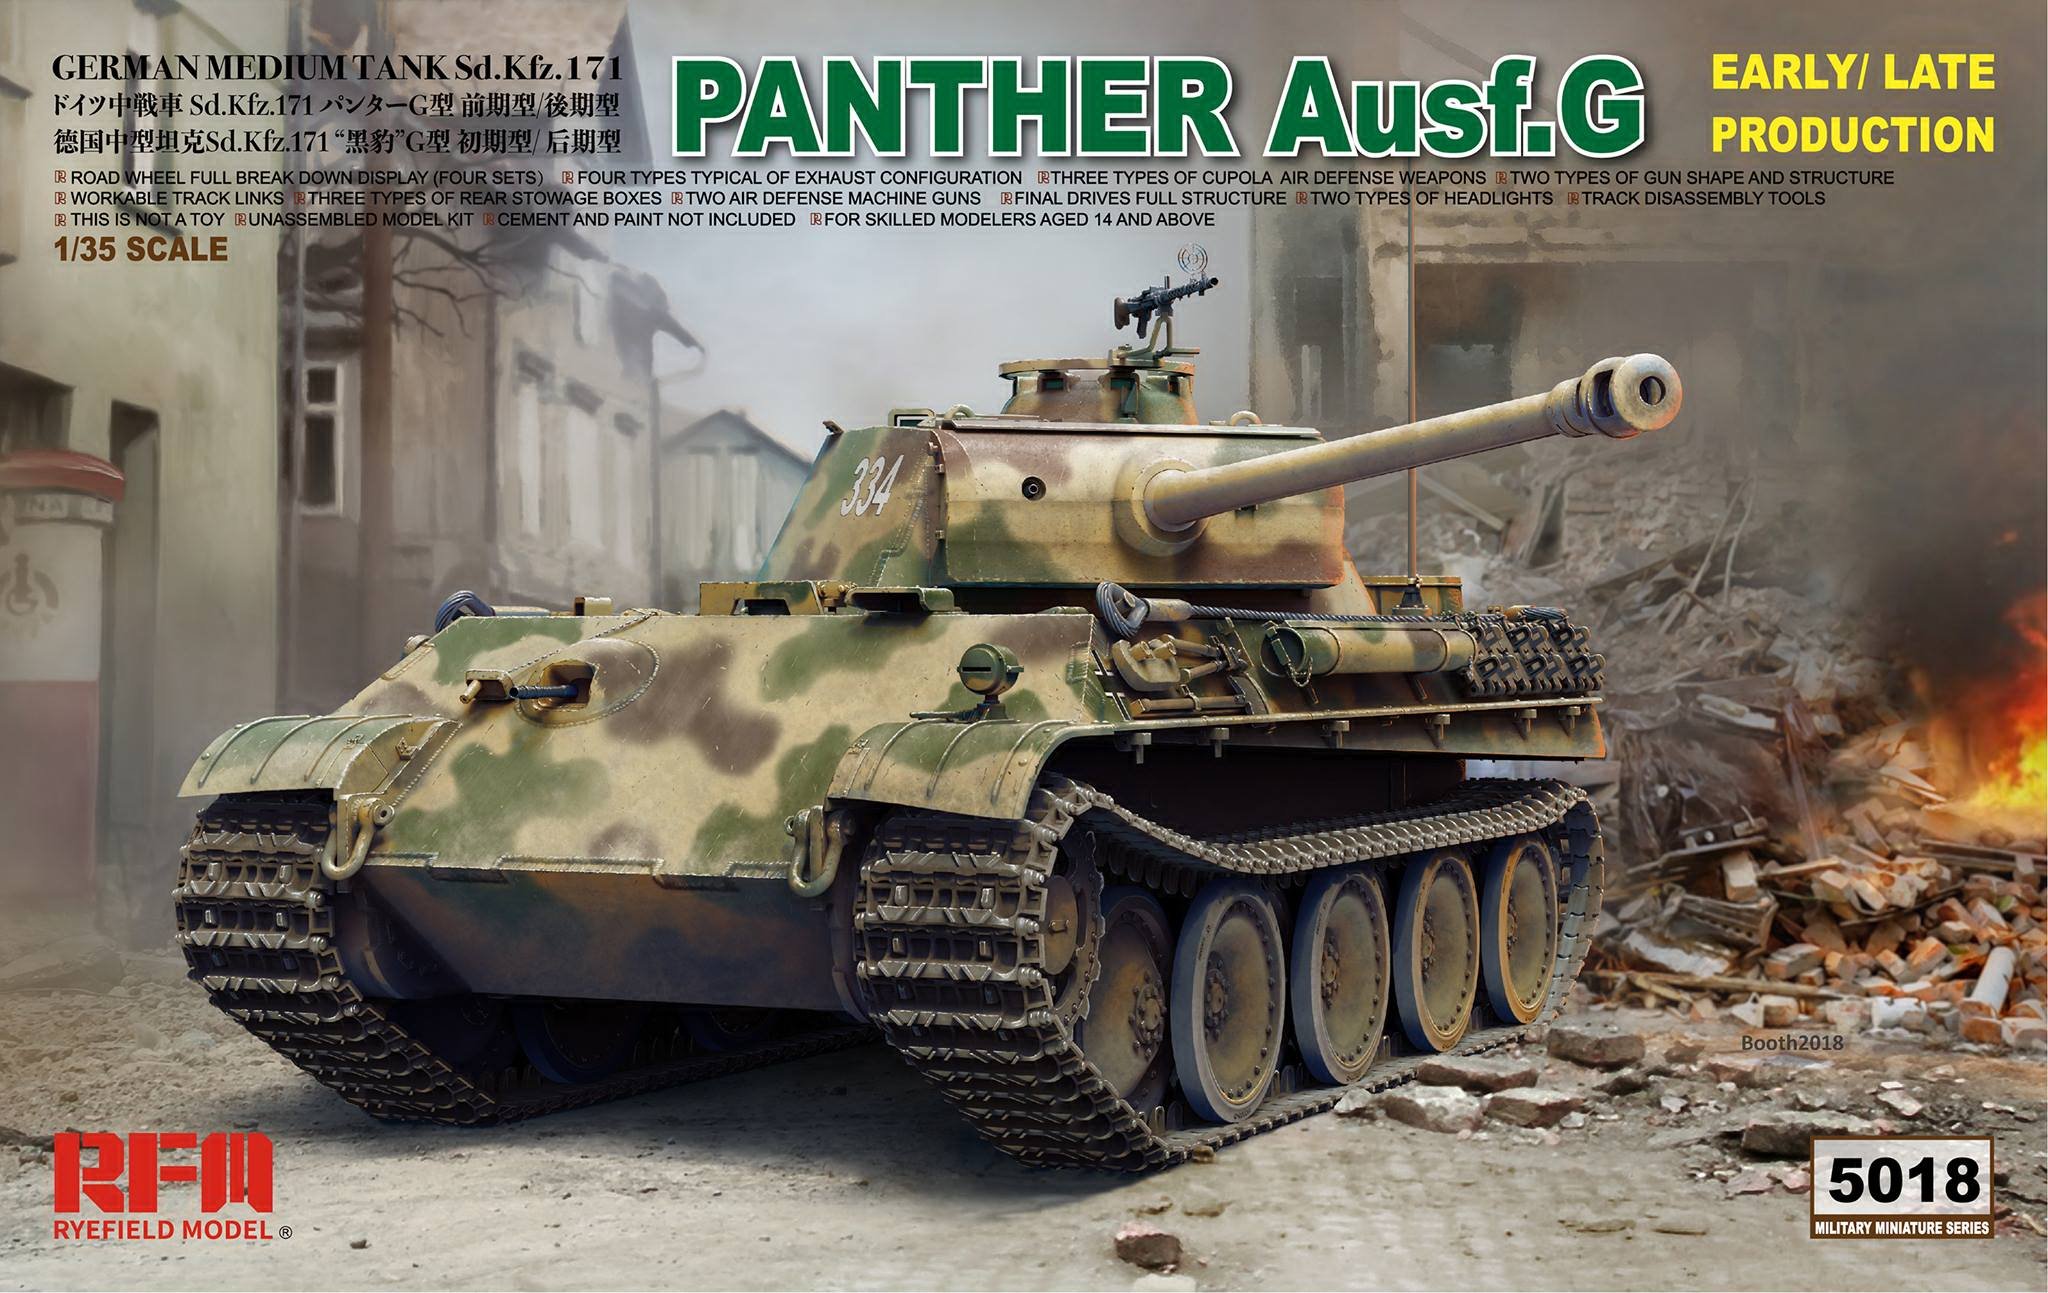 1/35 German Sd.Kfz.171 Panther Ausf.G Early/Late Production - Click Image to Close